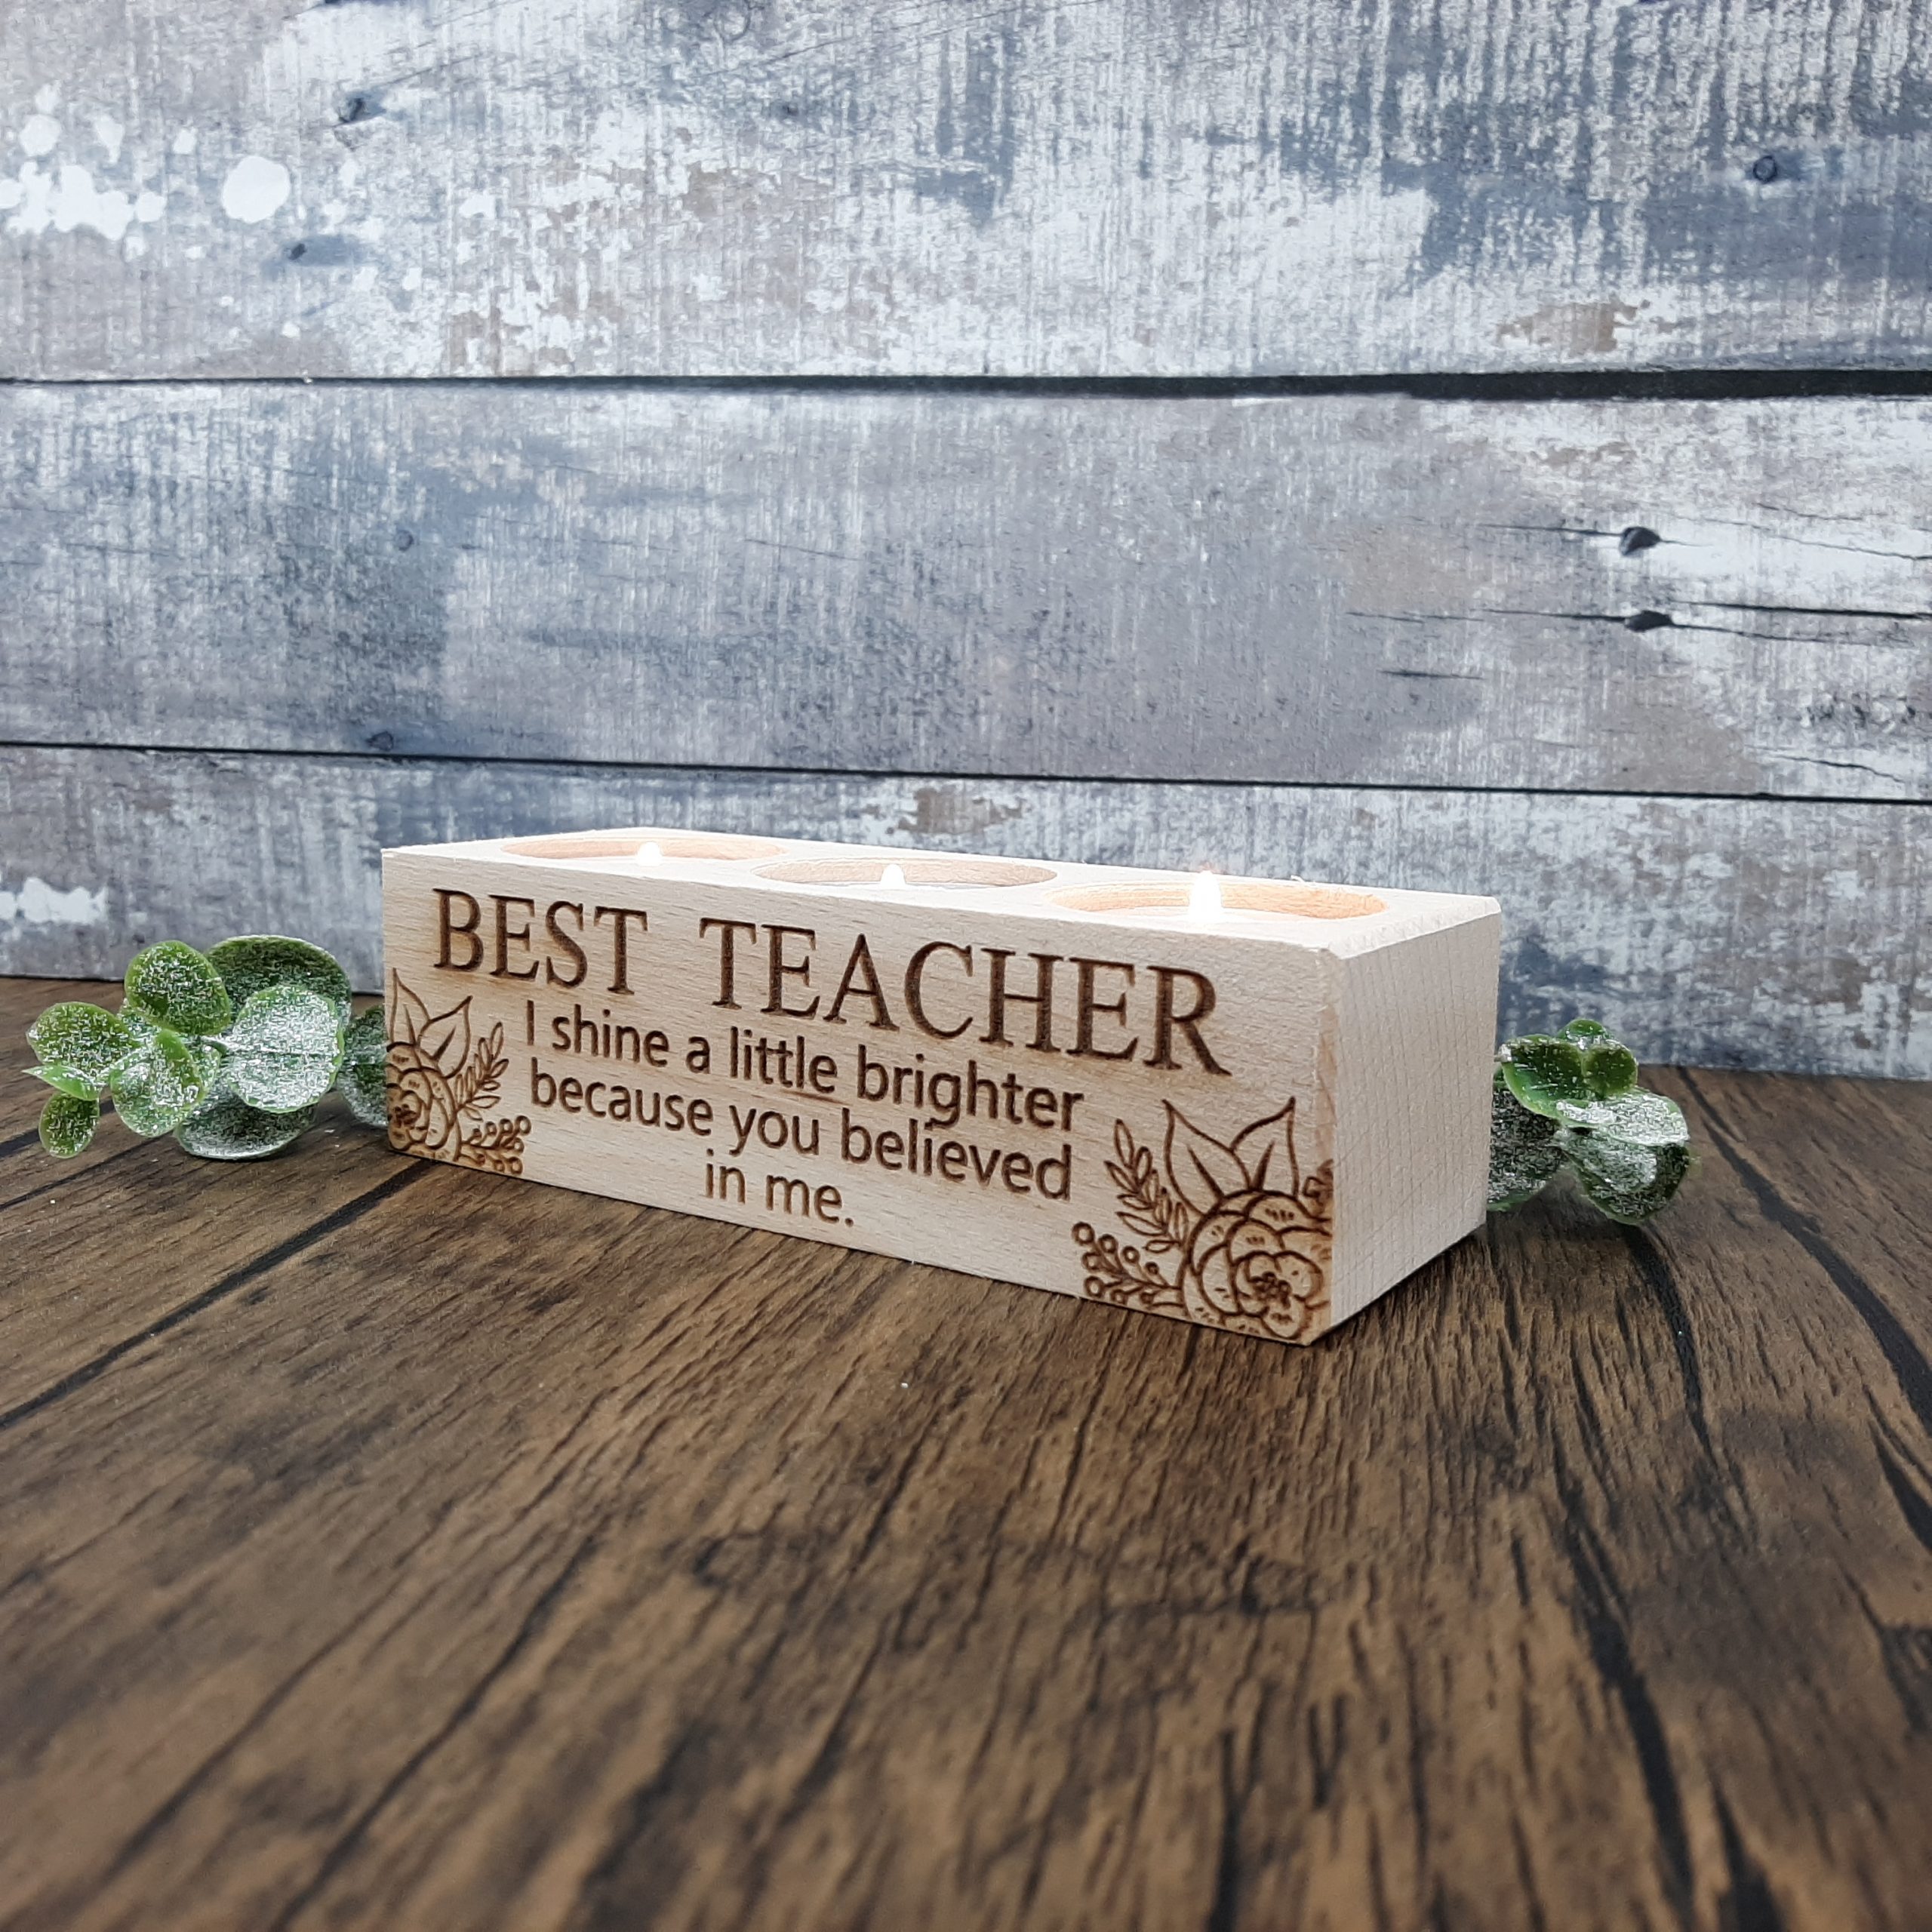 wooden teacher tealight holder with 3 tealights with engraved personalisation